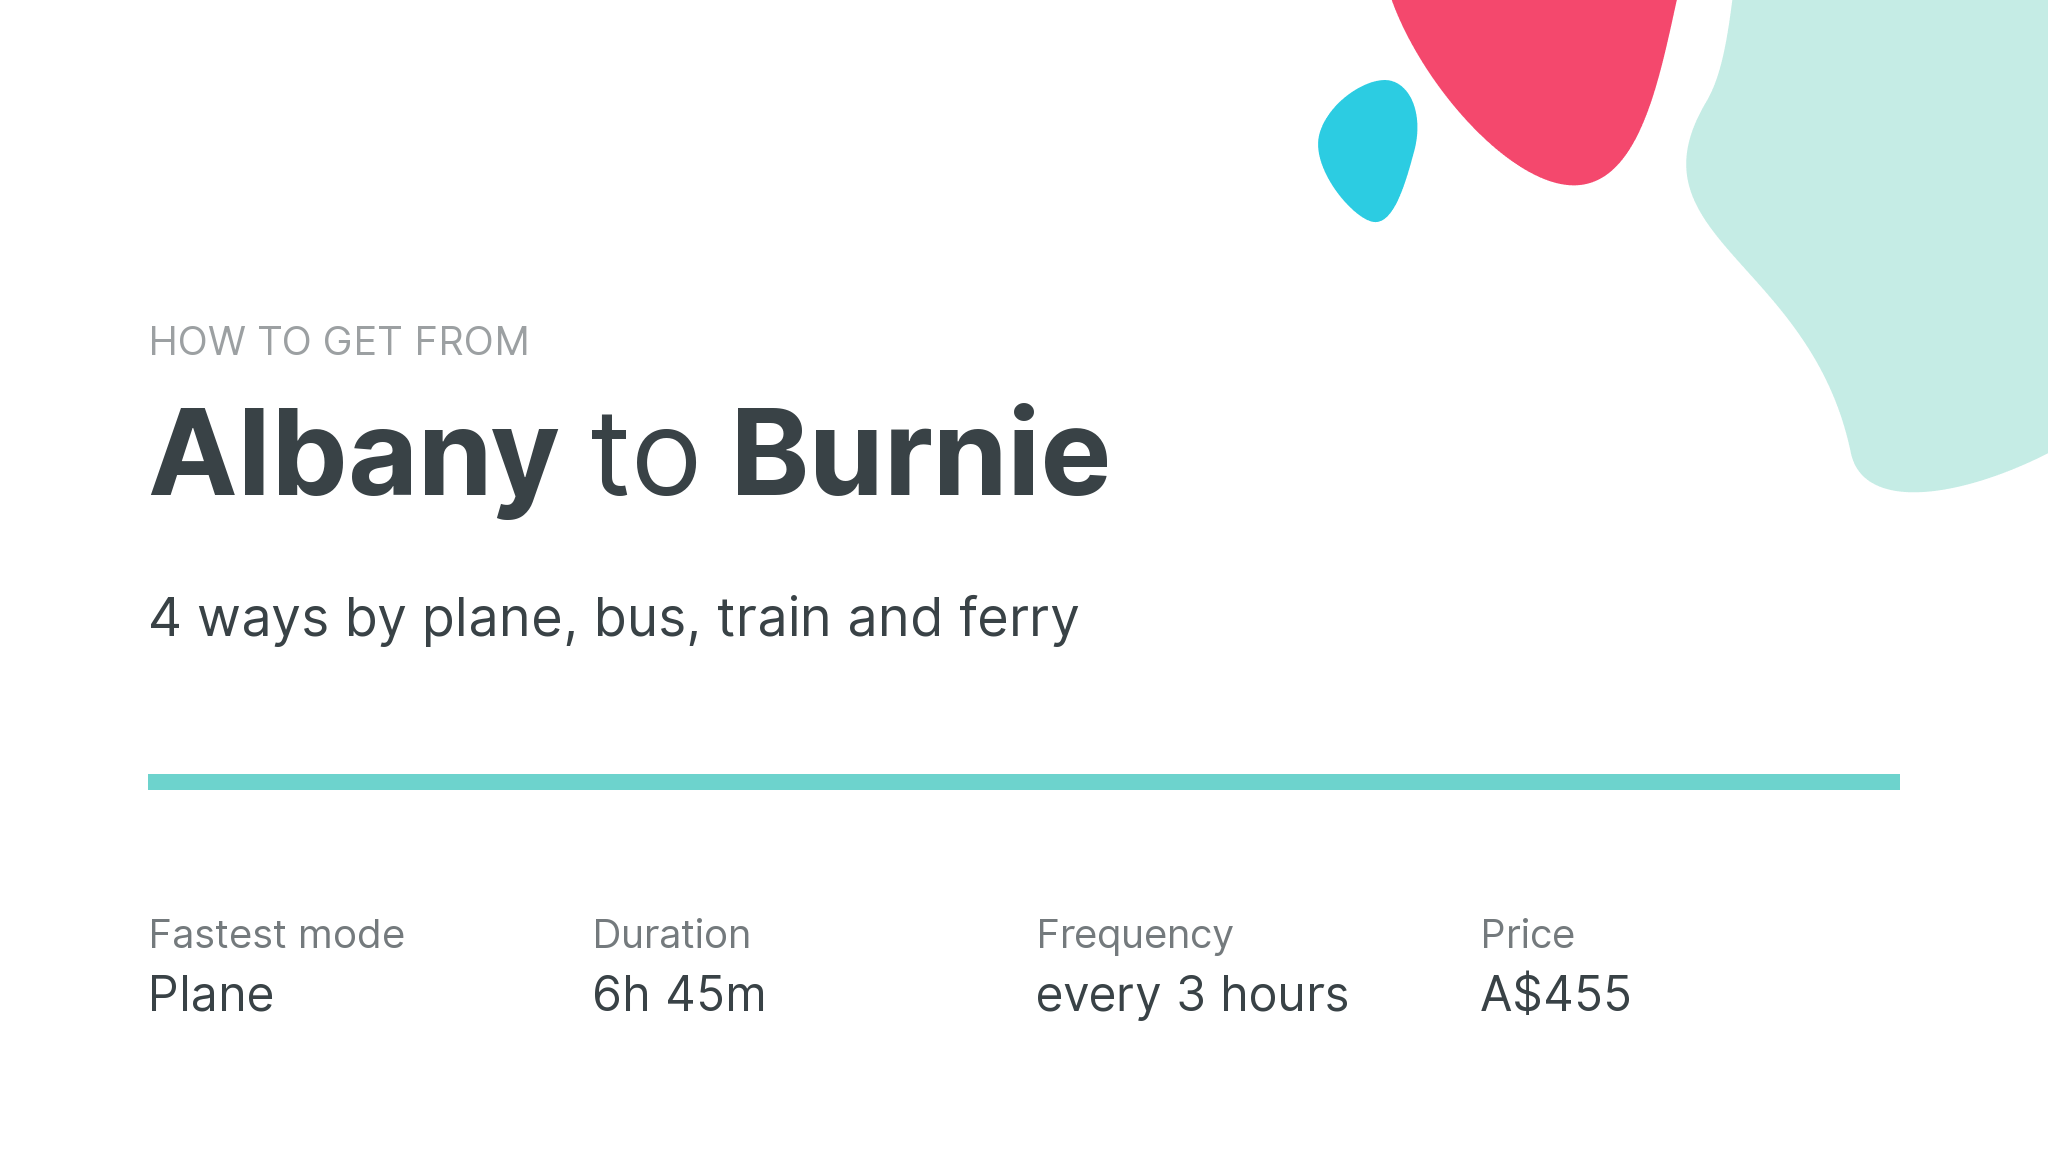 How do I get from Albany to Burnie